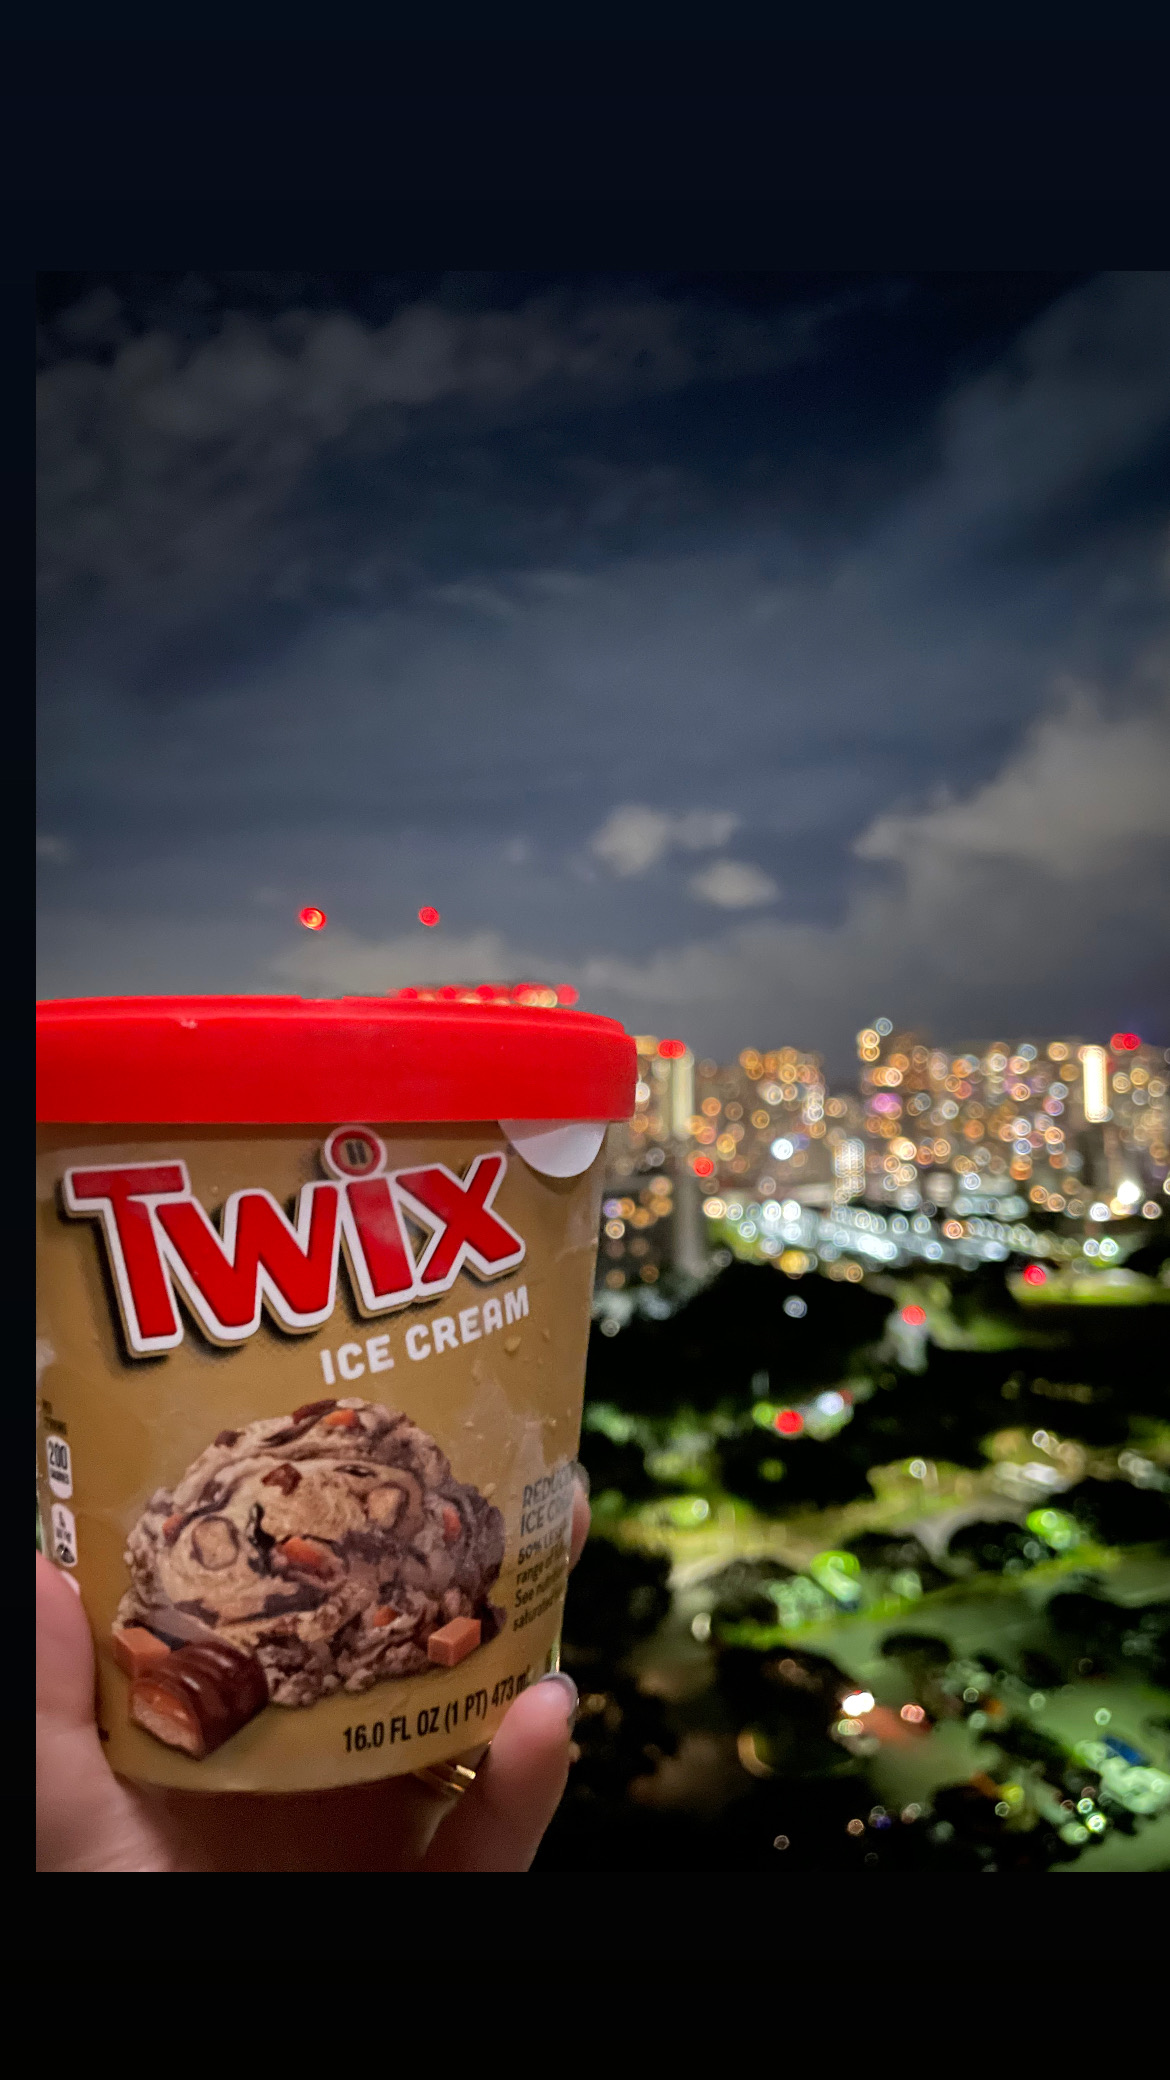 You are currently viewing バルコニーで夜景とTwix